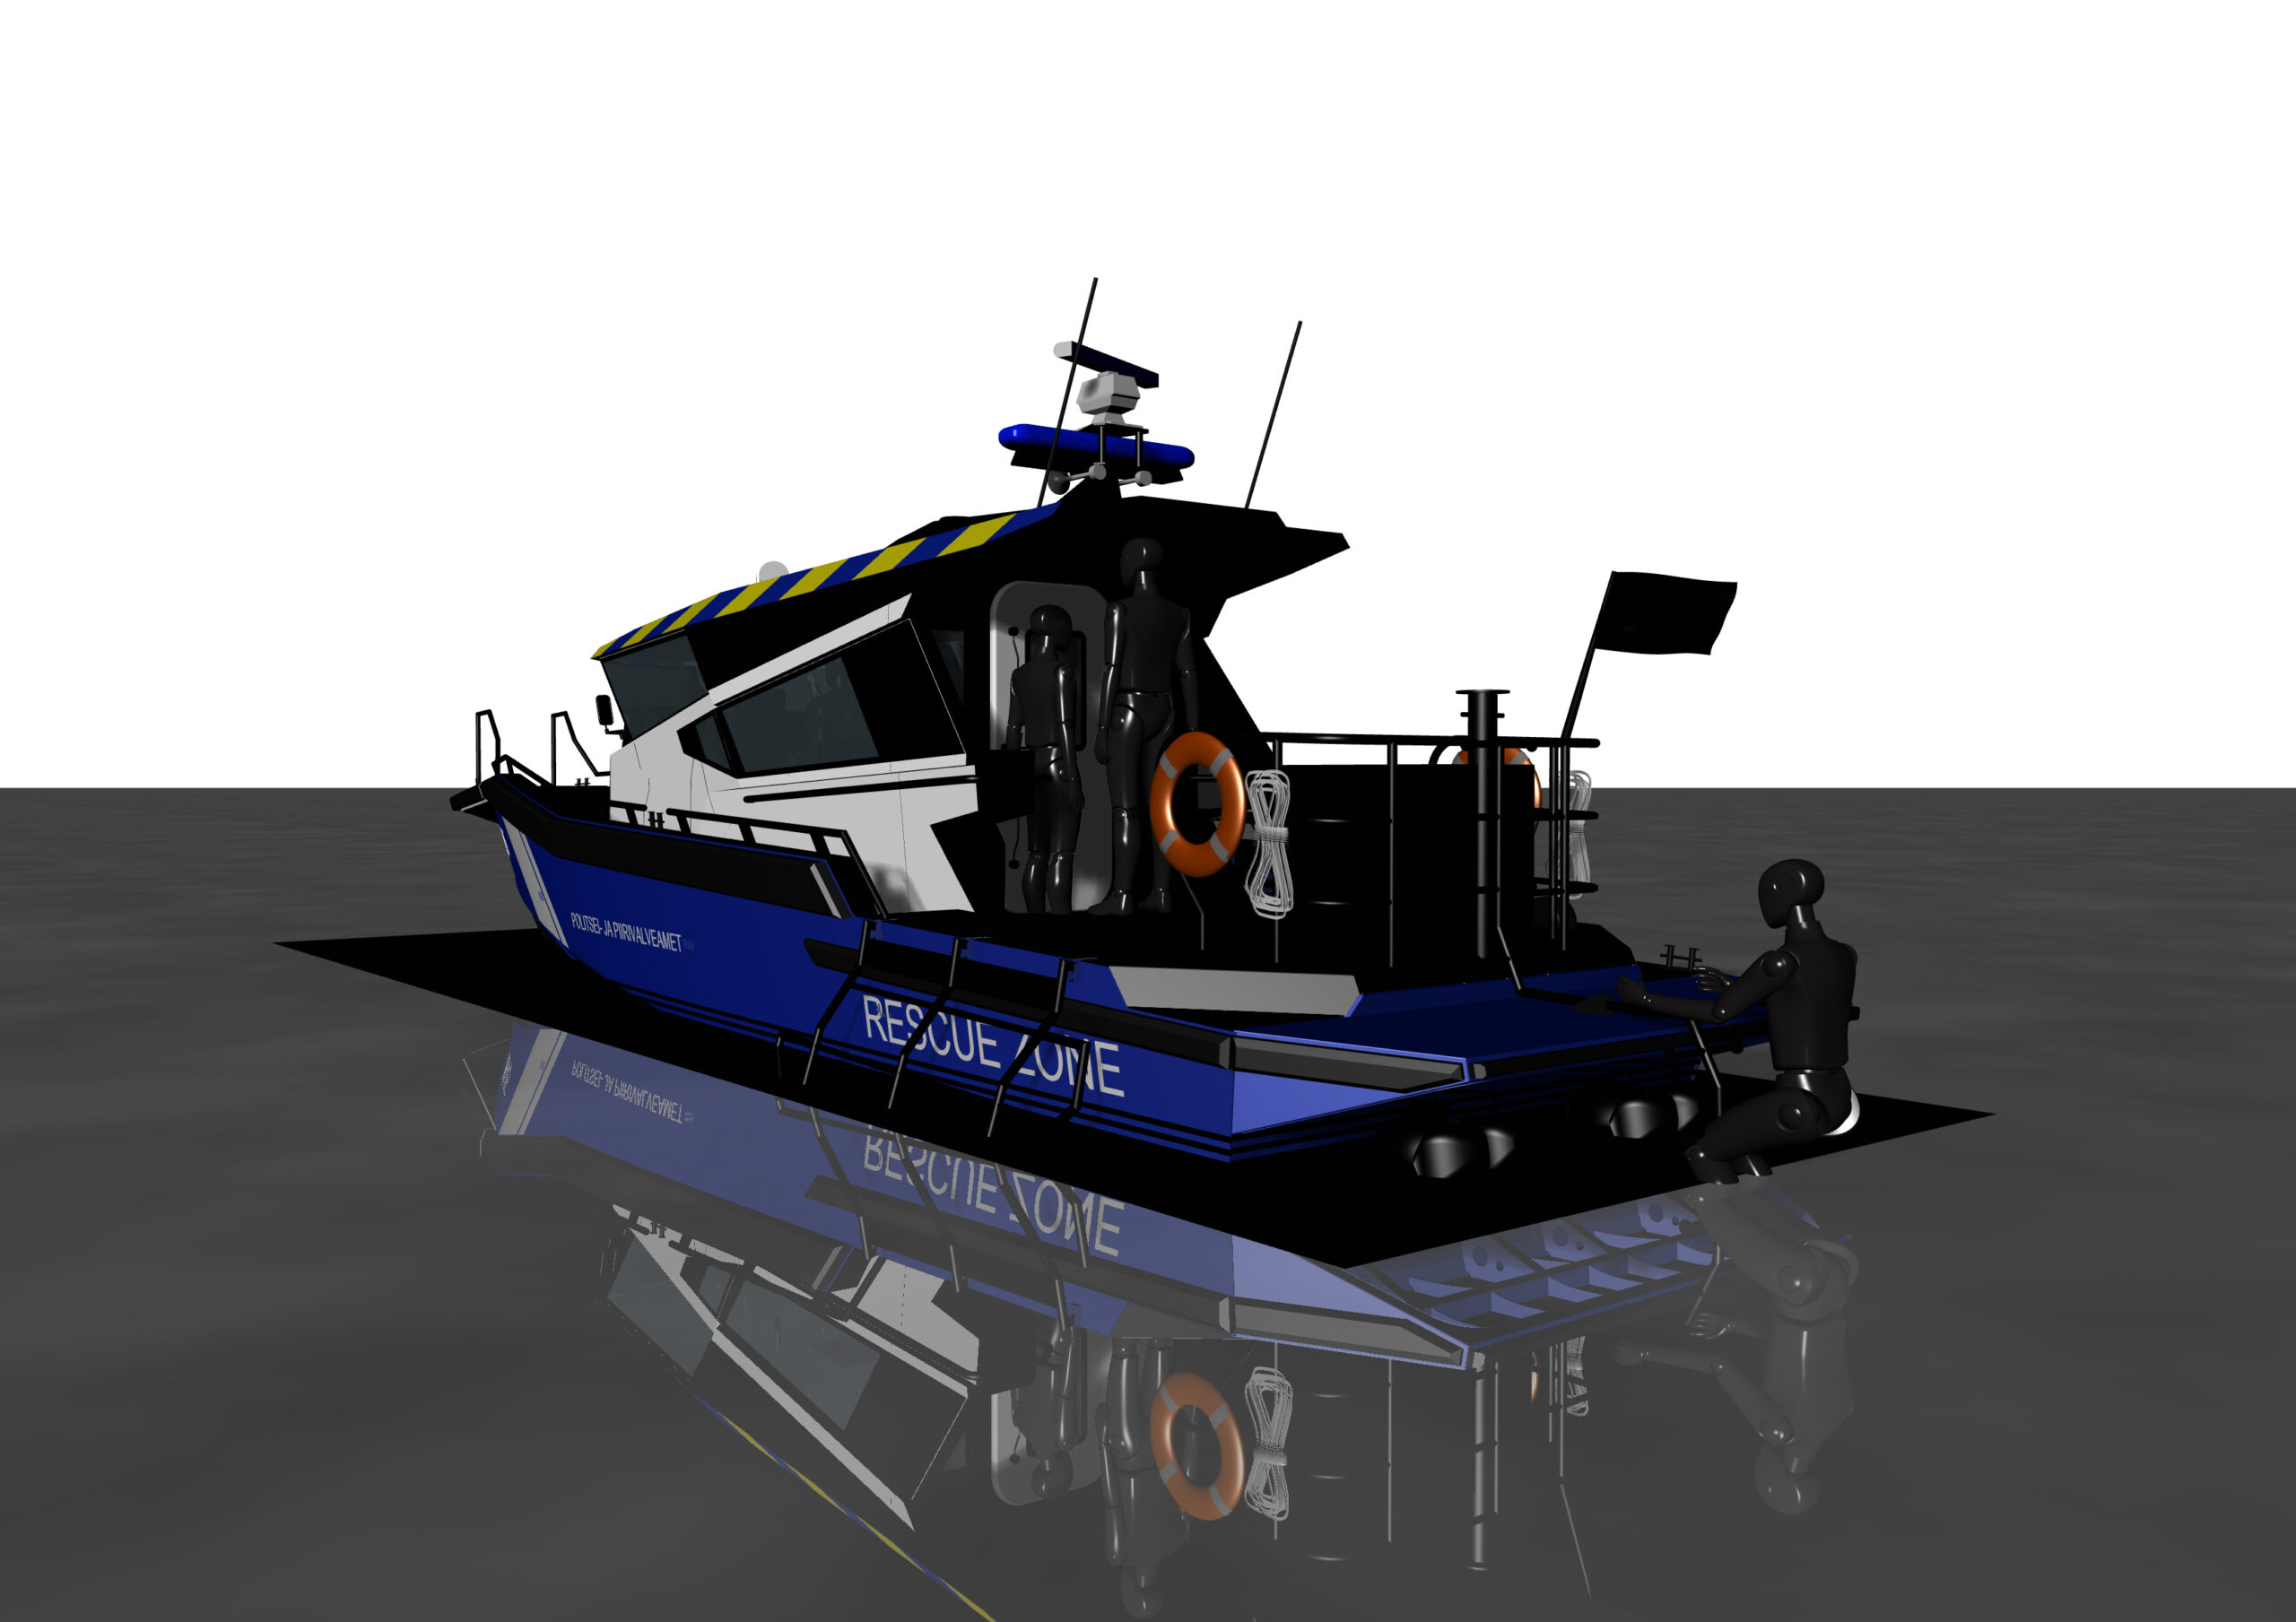 Search and rescue boat